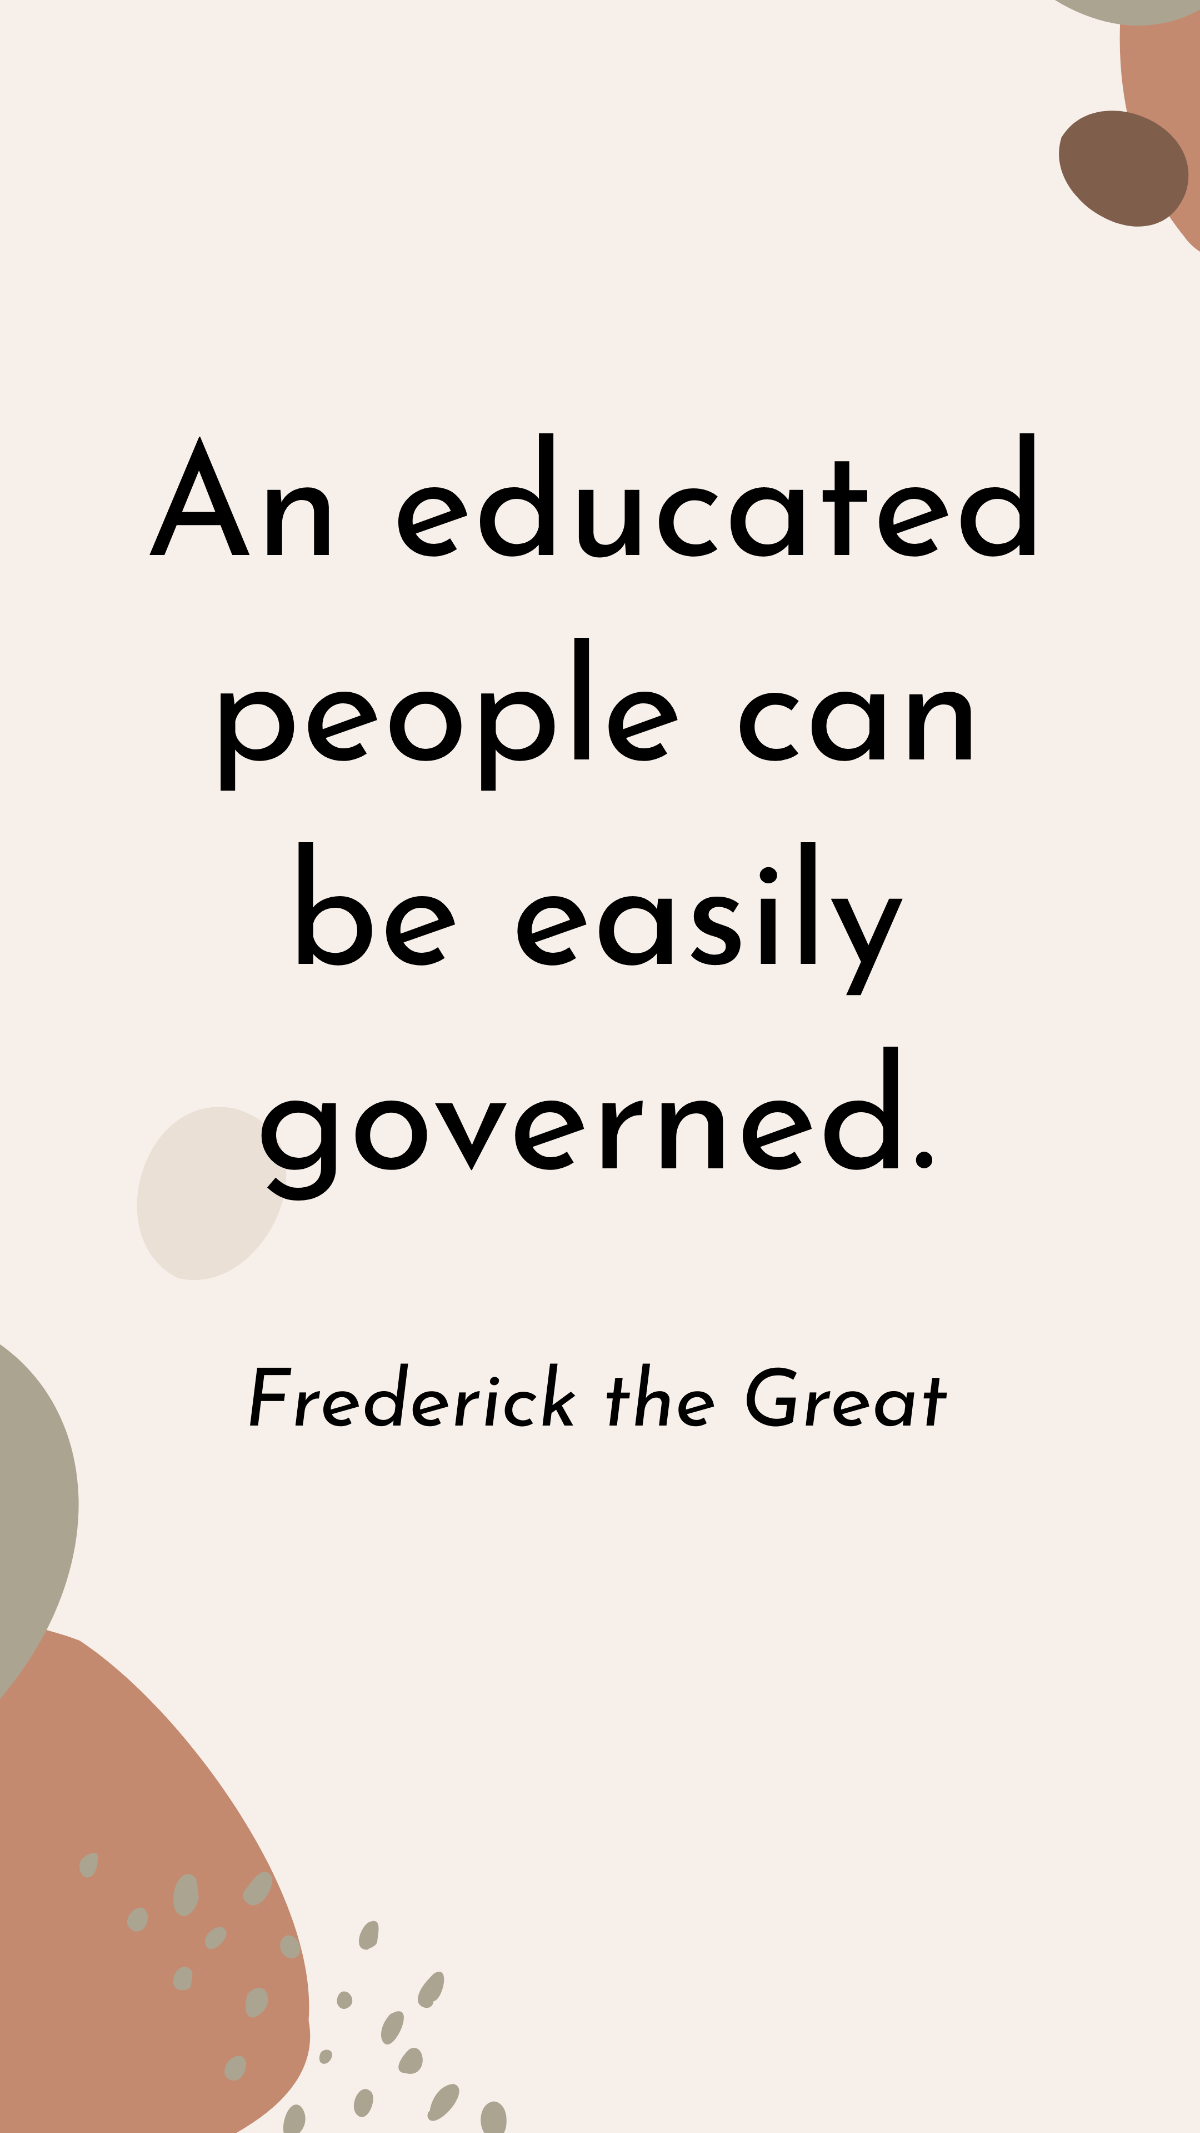 Frederick the Great - An educated people can be easily governed. Template